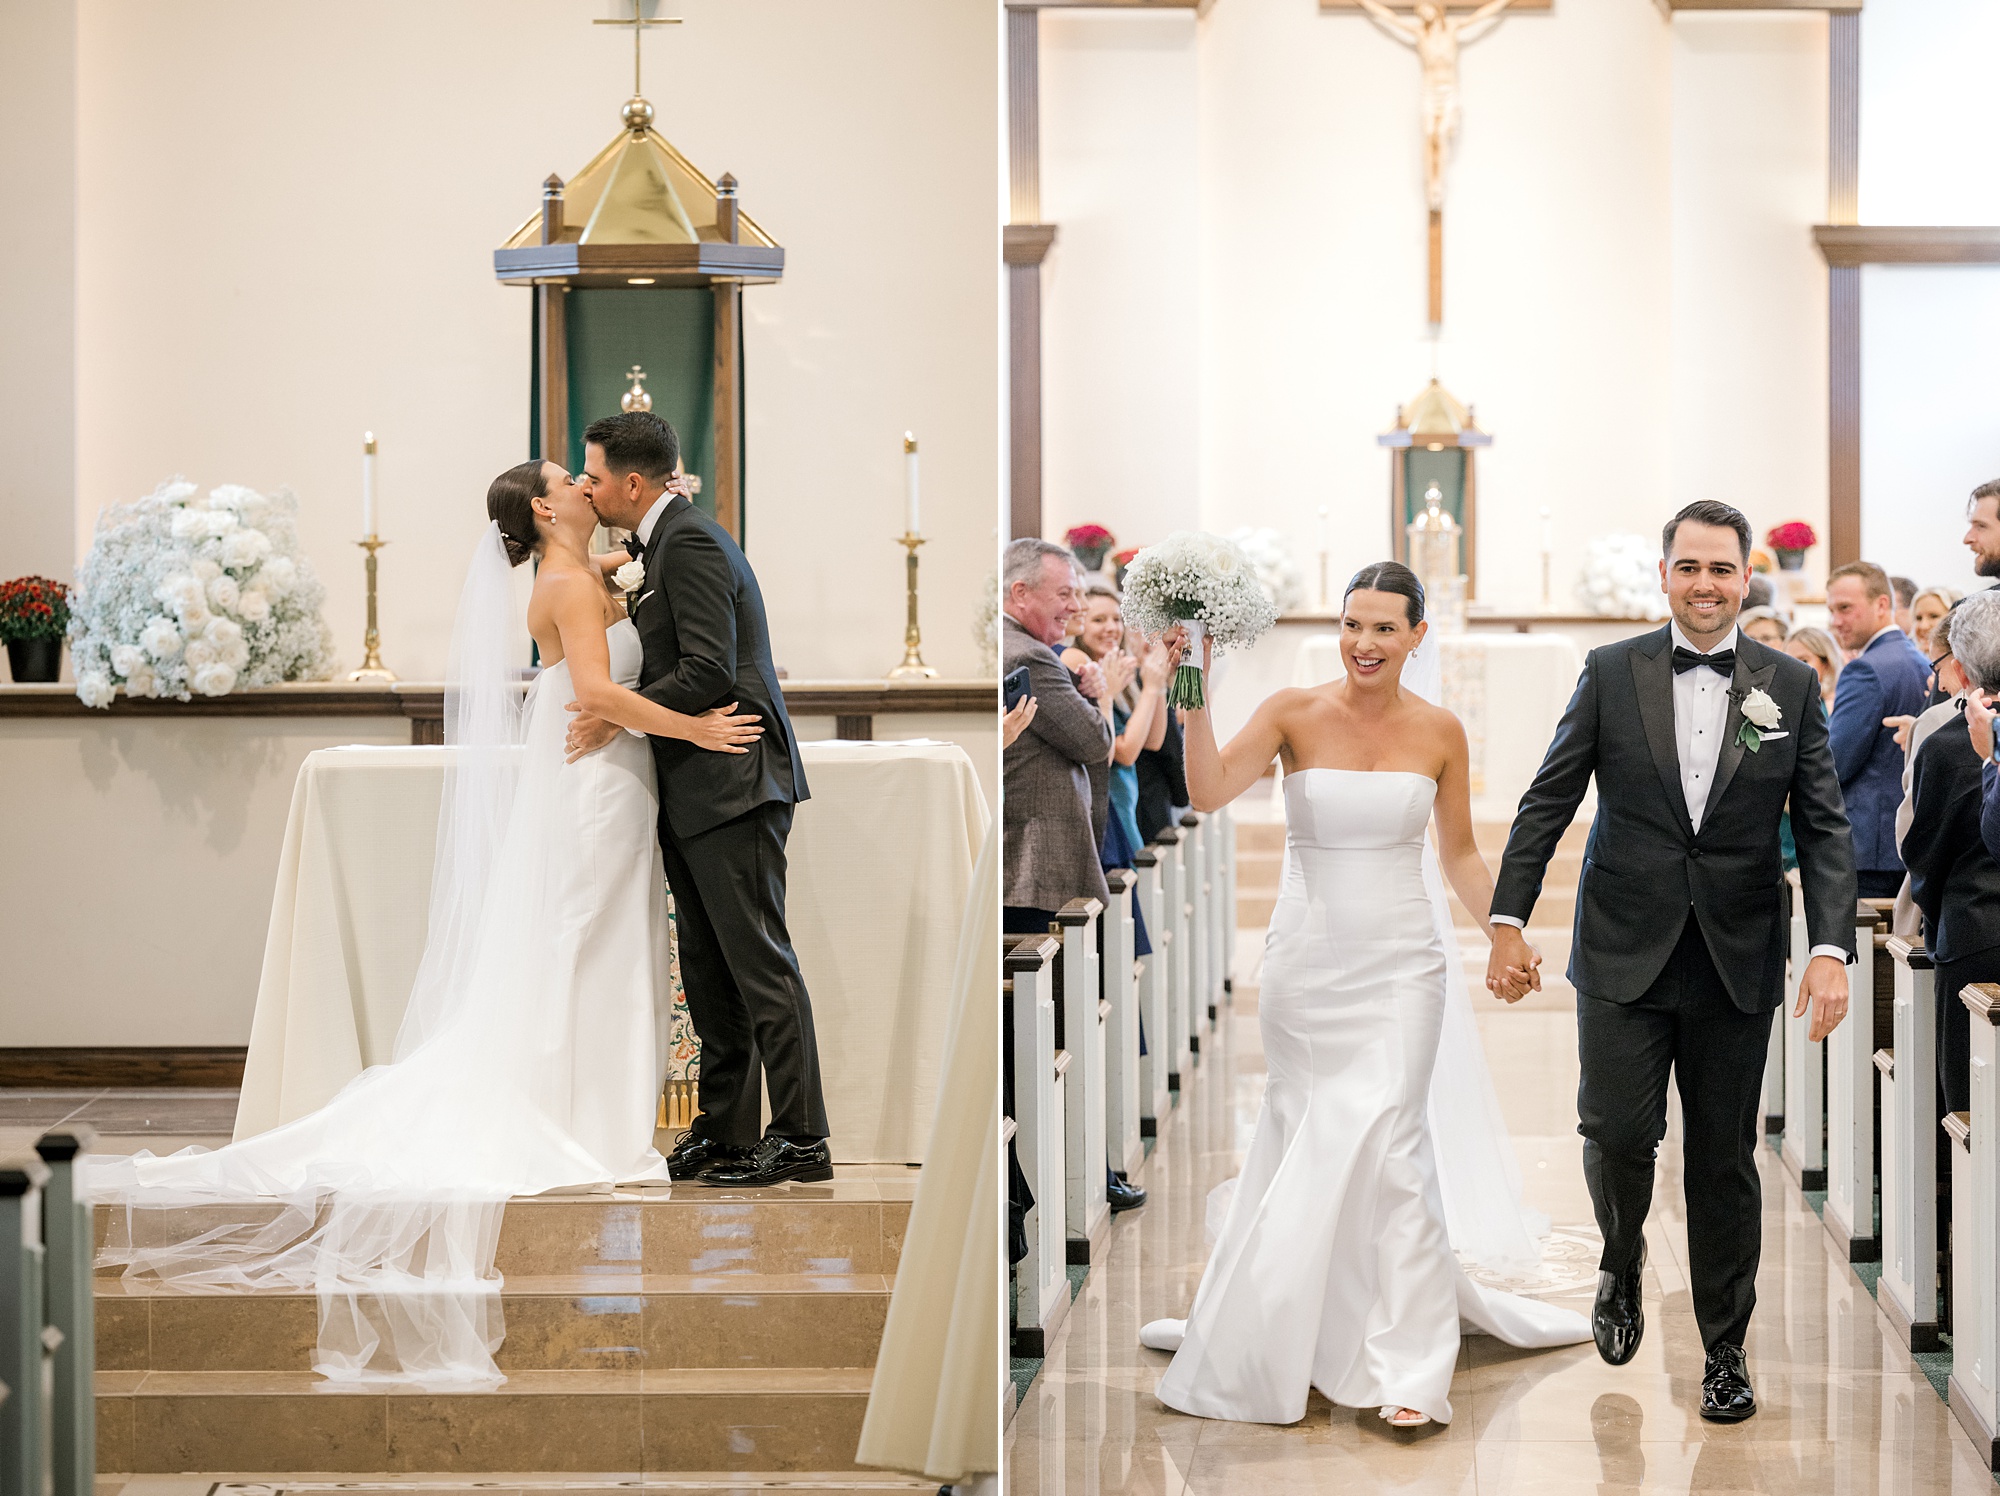 newlyweds kiss at alter after traditional Catholic church wedding in New Jersey